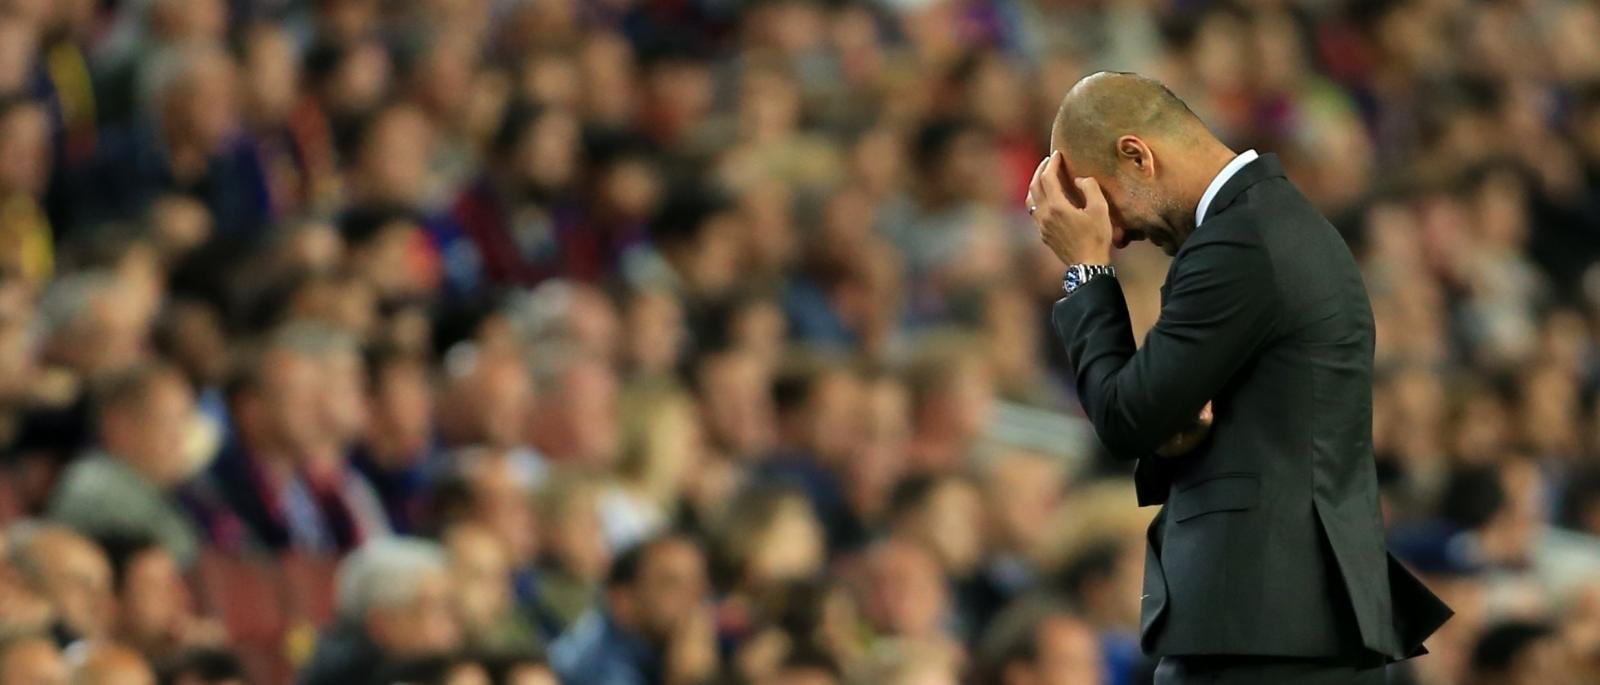 4 key differences between Guardiola’s Man City and Barcelona